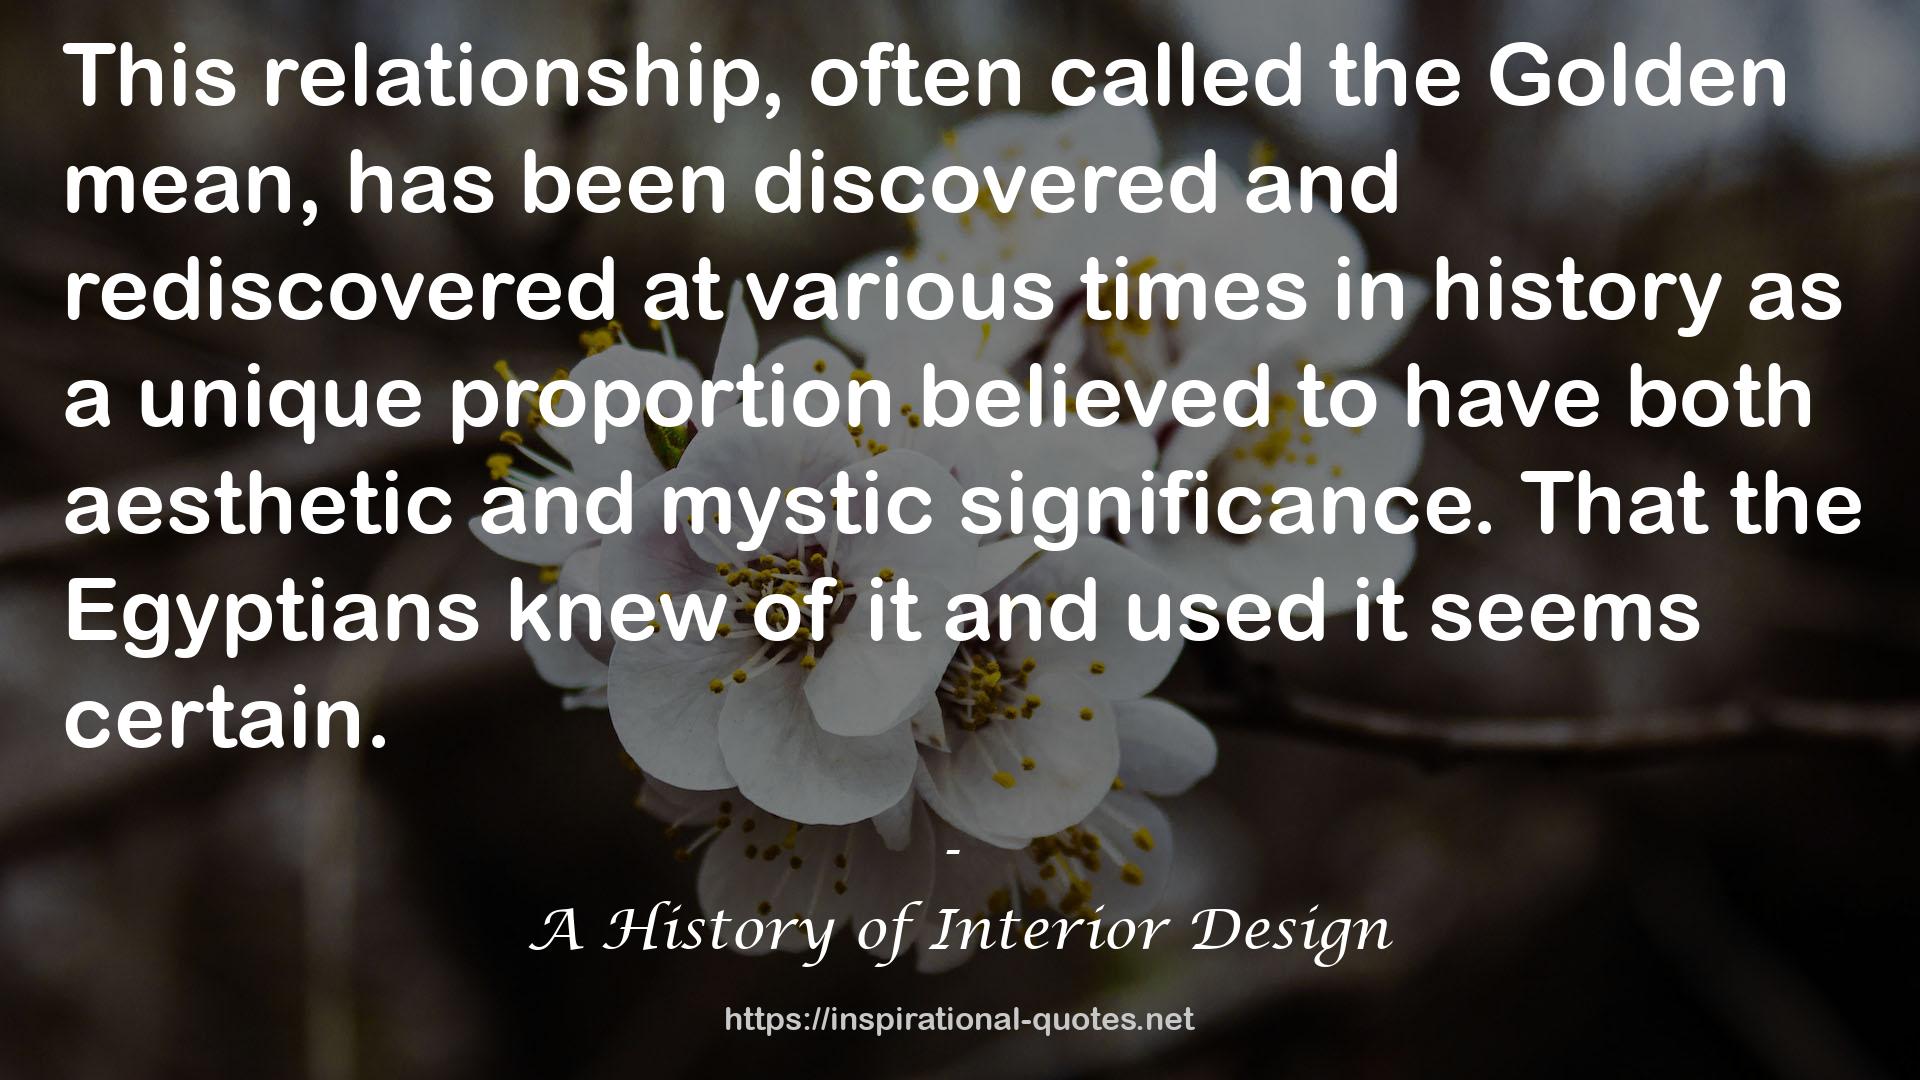 A History of Interior Design QUOTES